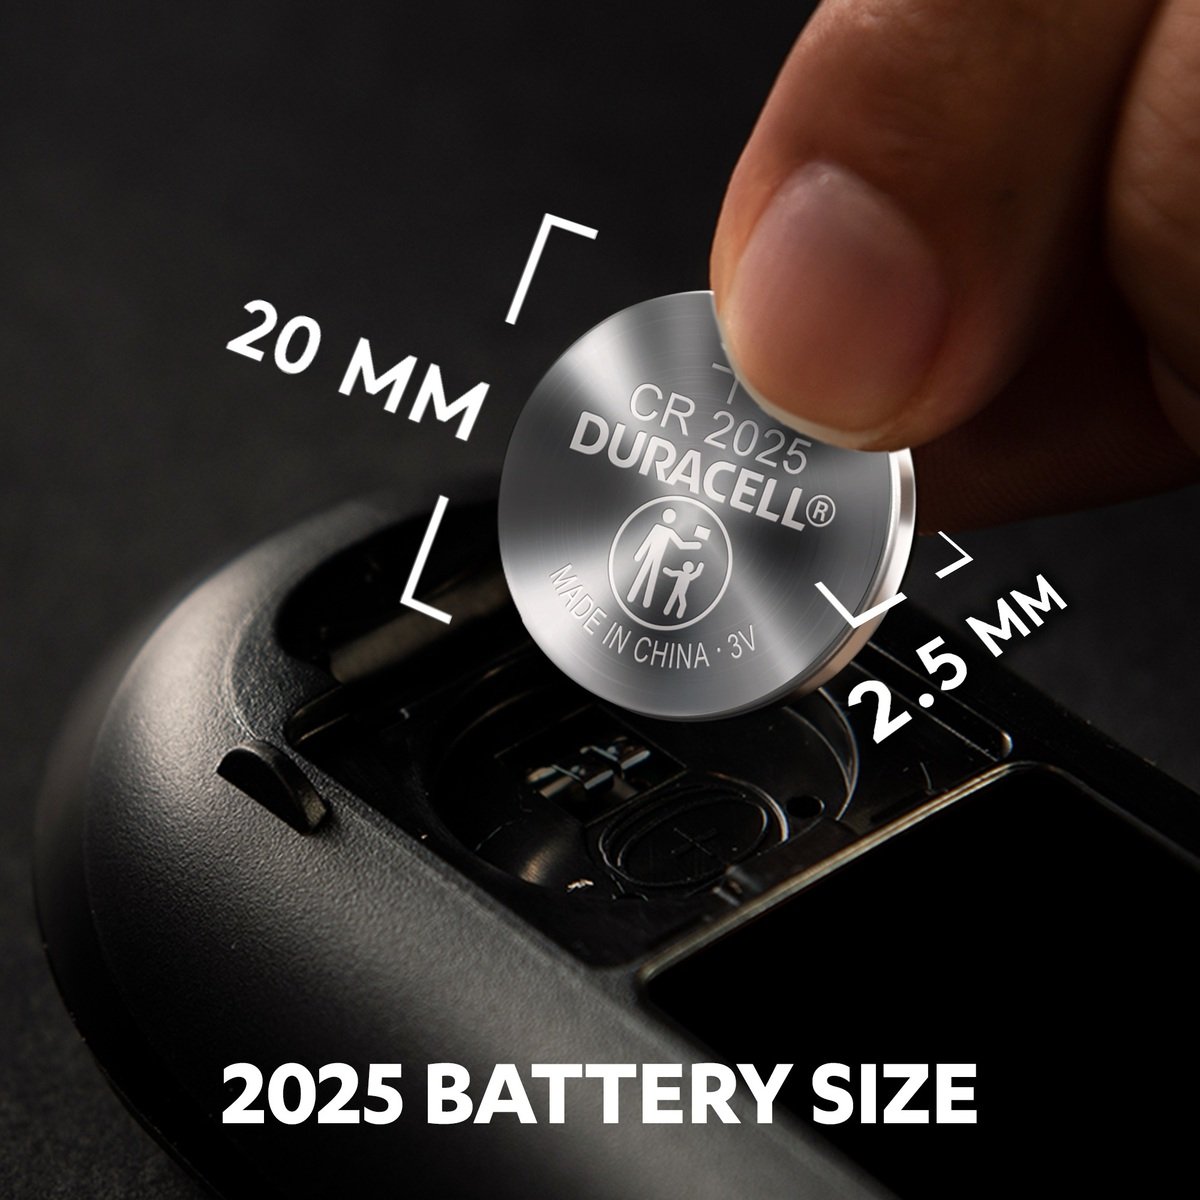 Duracell Specialty 2025 Lithium Coin Battery 3V, pack of 2 (DL2025/CR2025) suitable for use in keyfobs, scales, wearables and medical devices